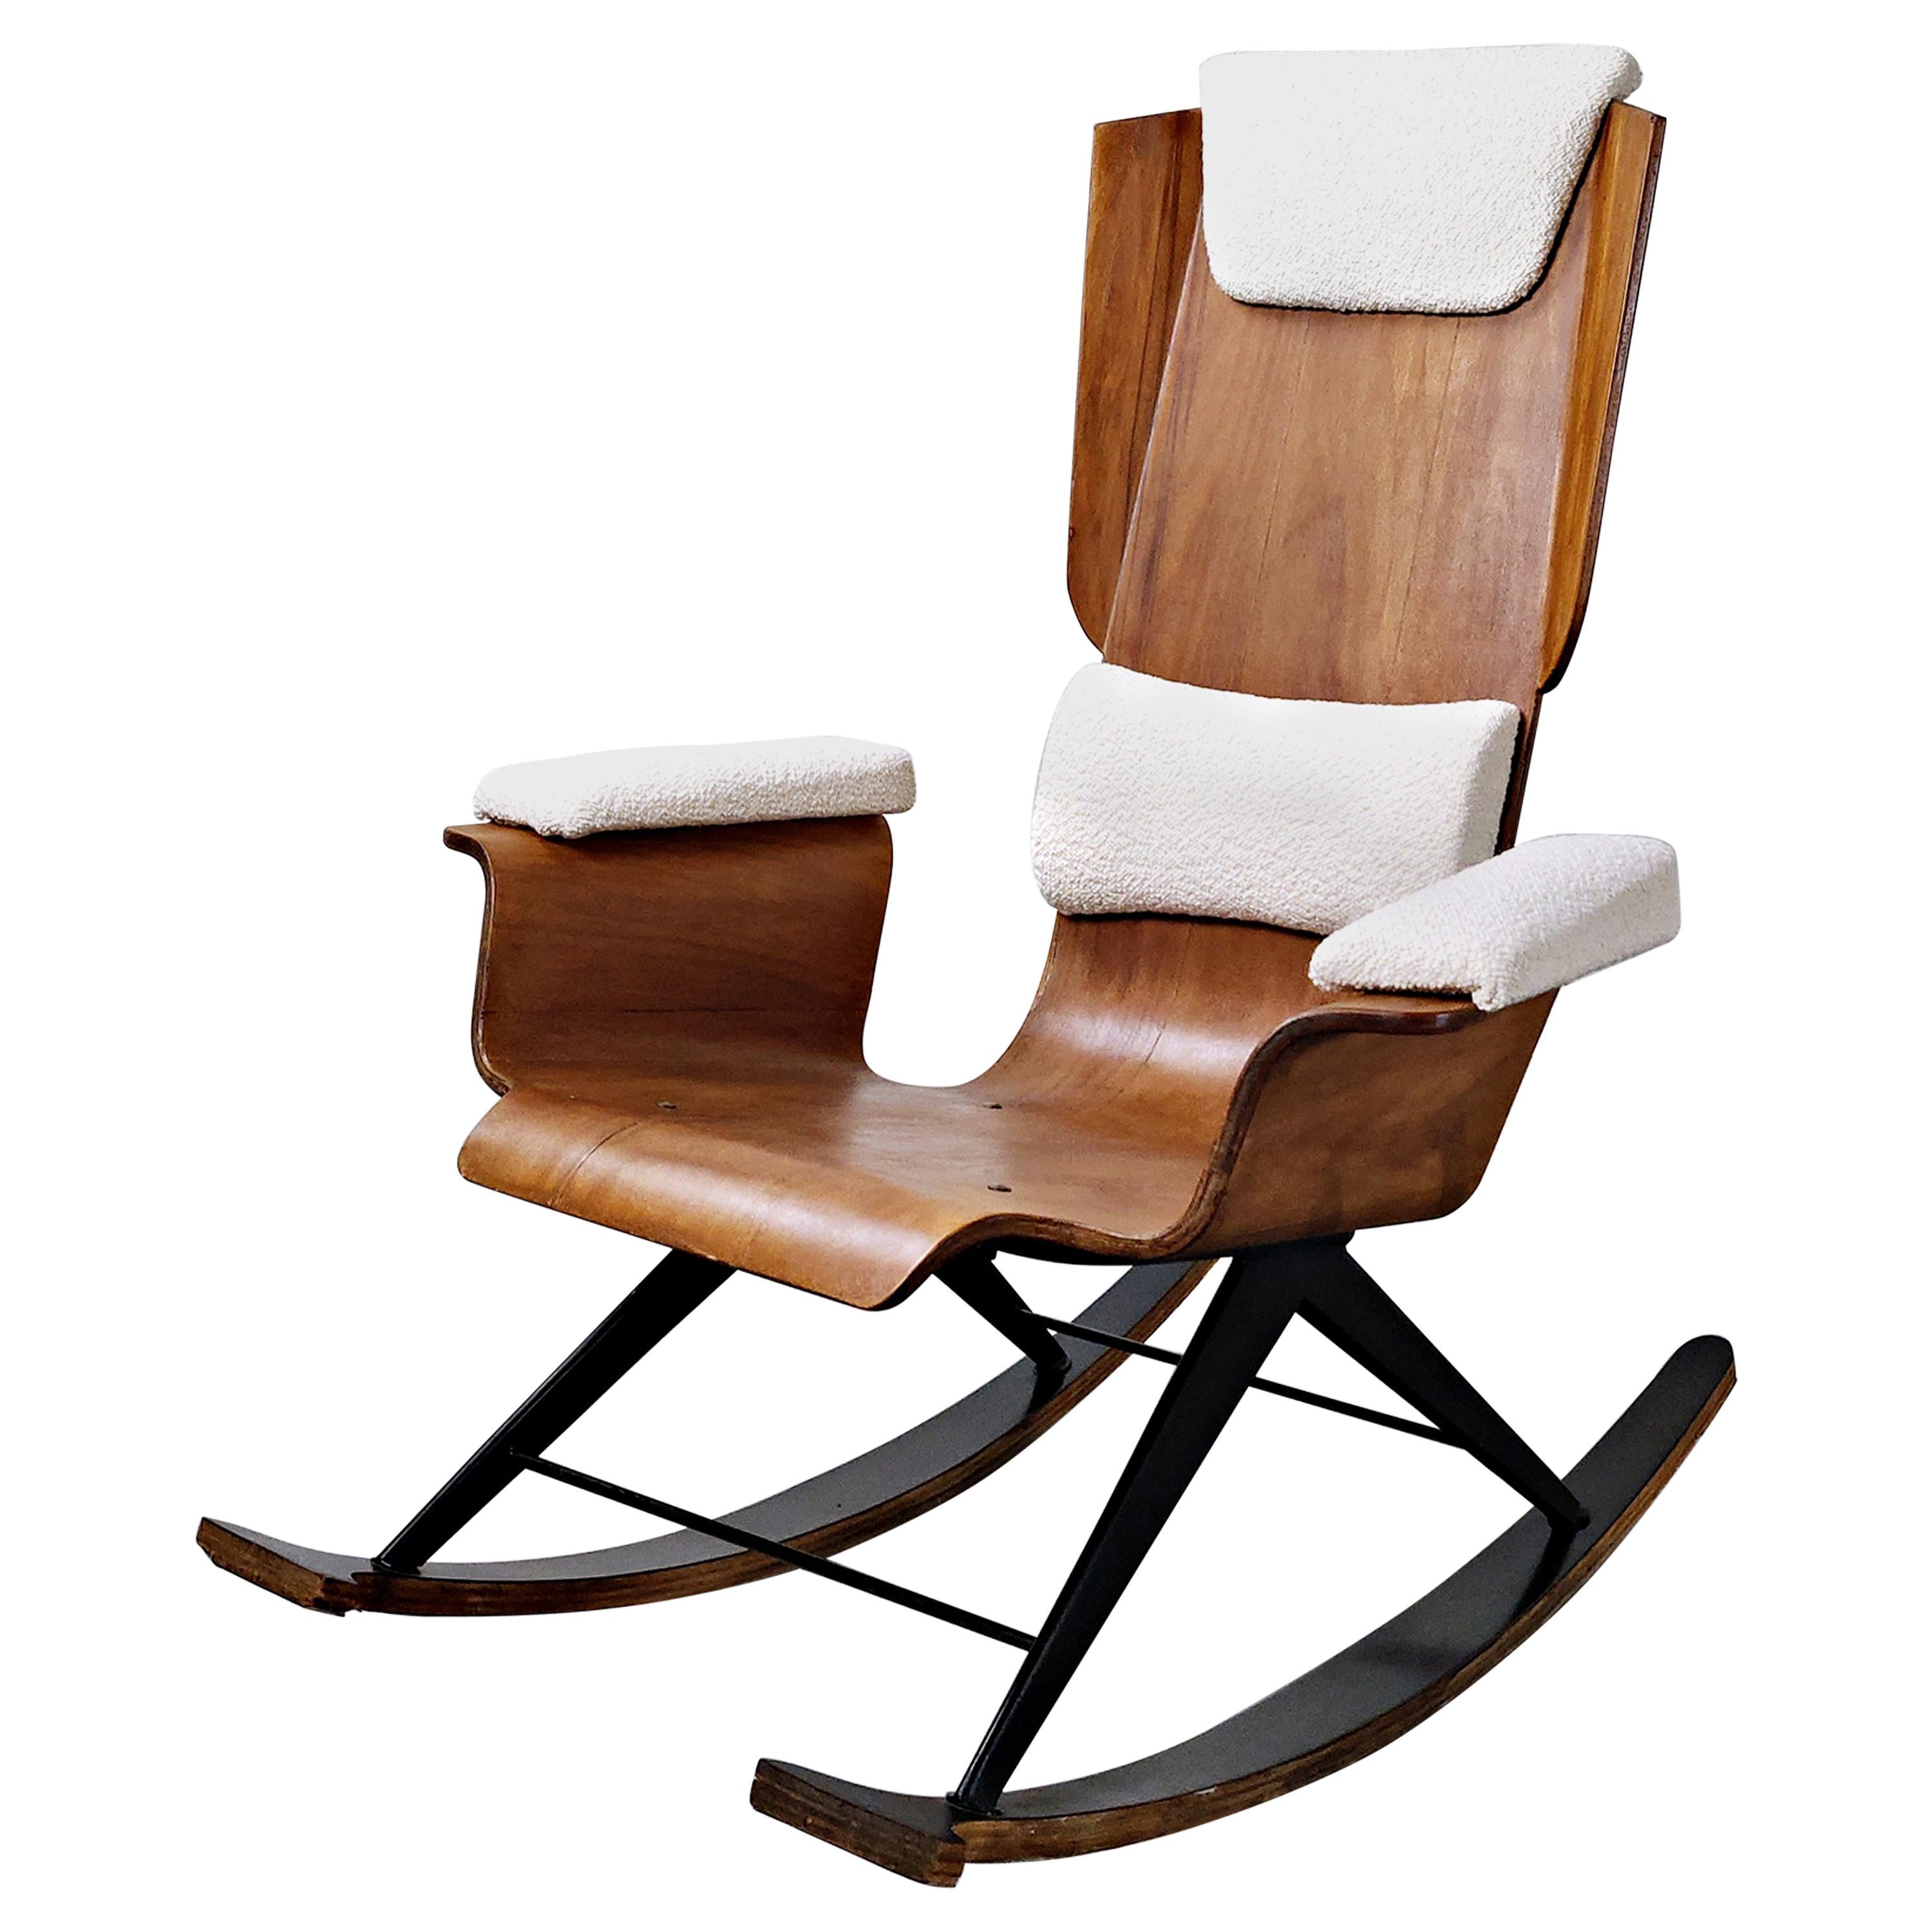 Wood rocking chair by Carlo Ratti - Italy 1960s